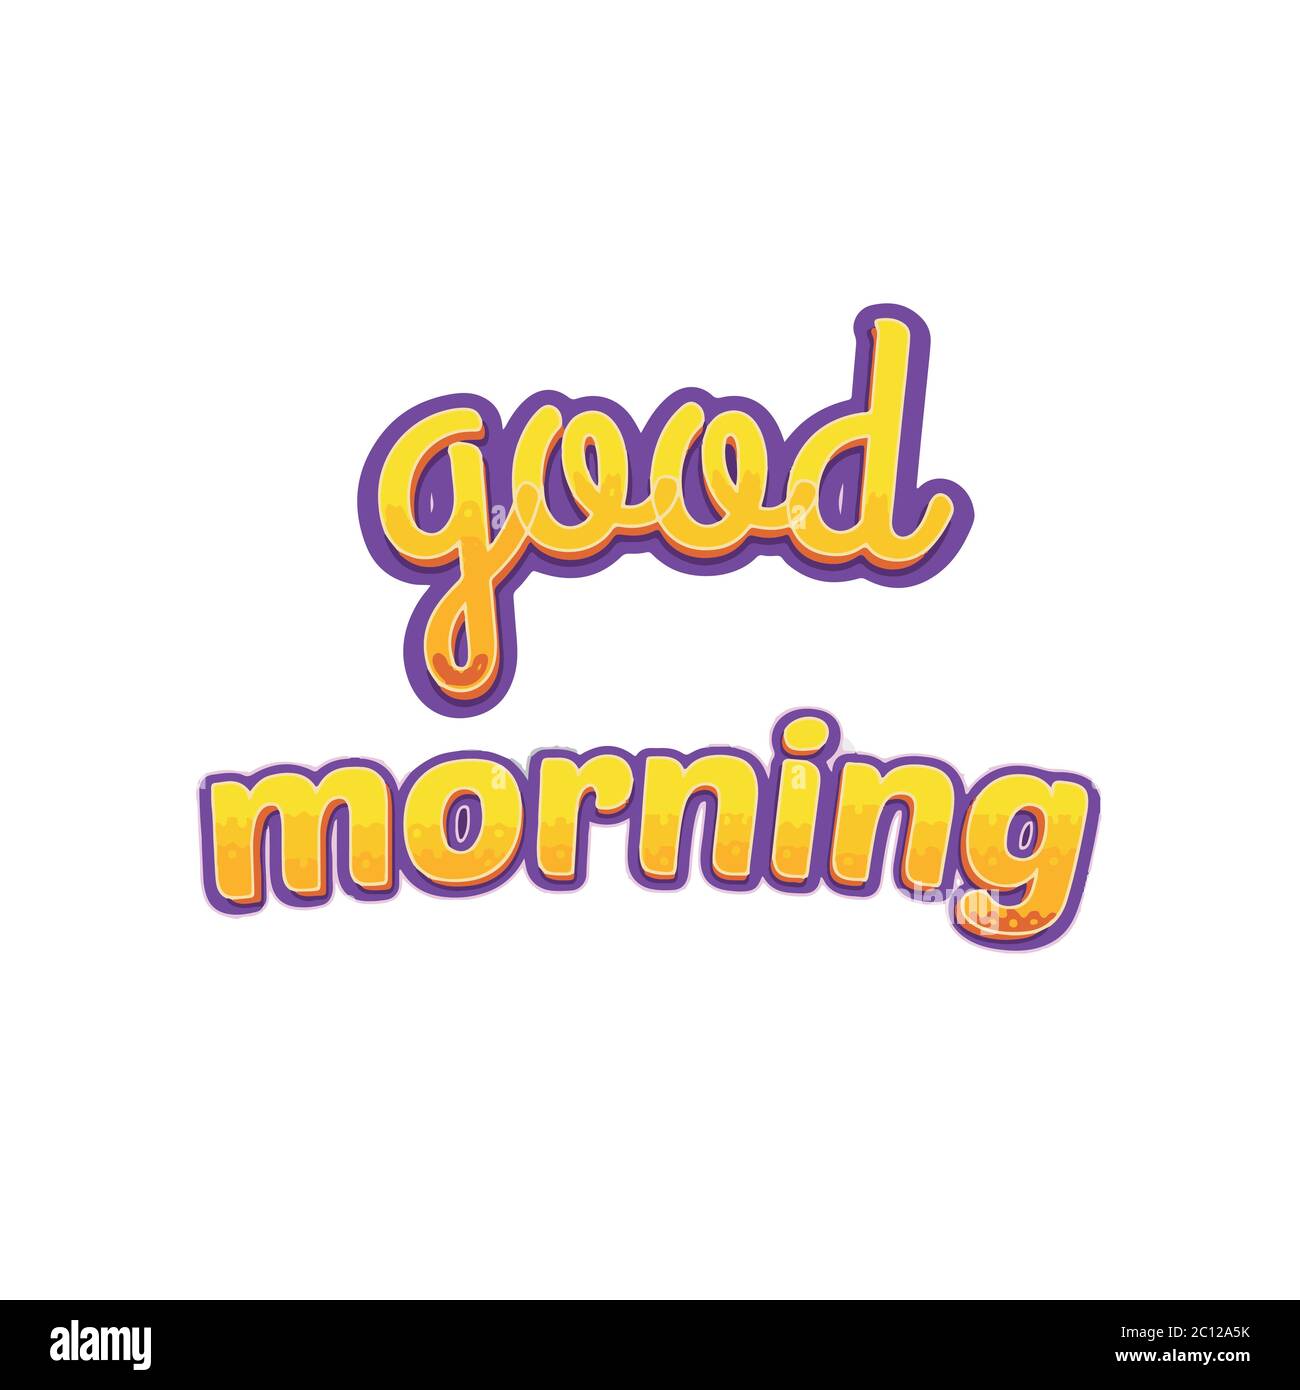 Good morning 3d quote simple positive message Stock Vector Image ...